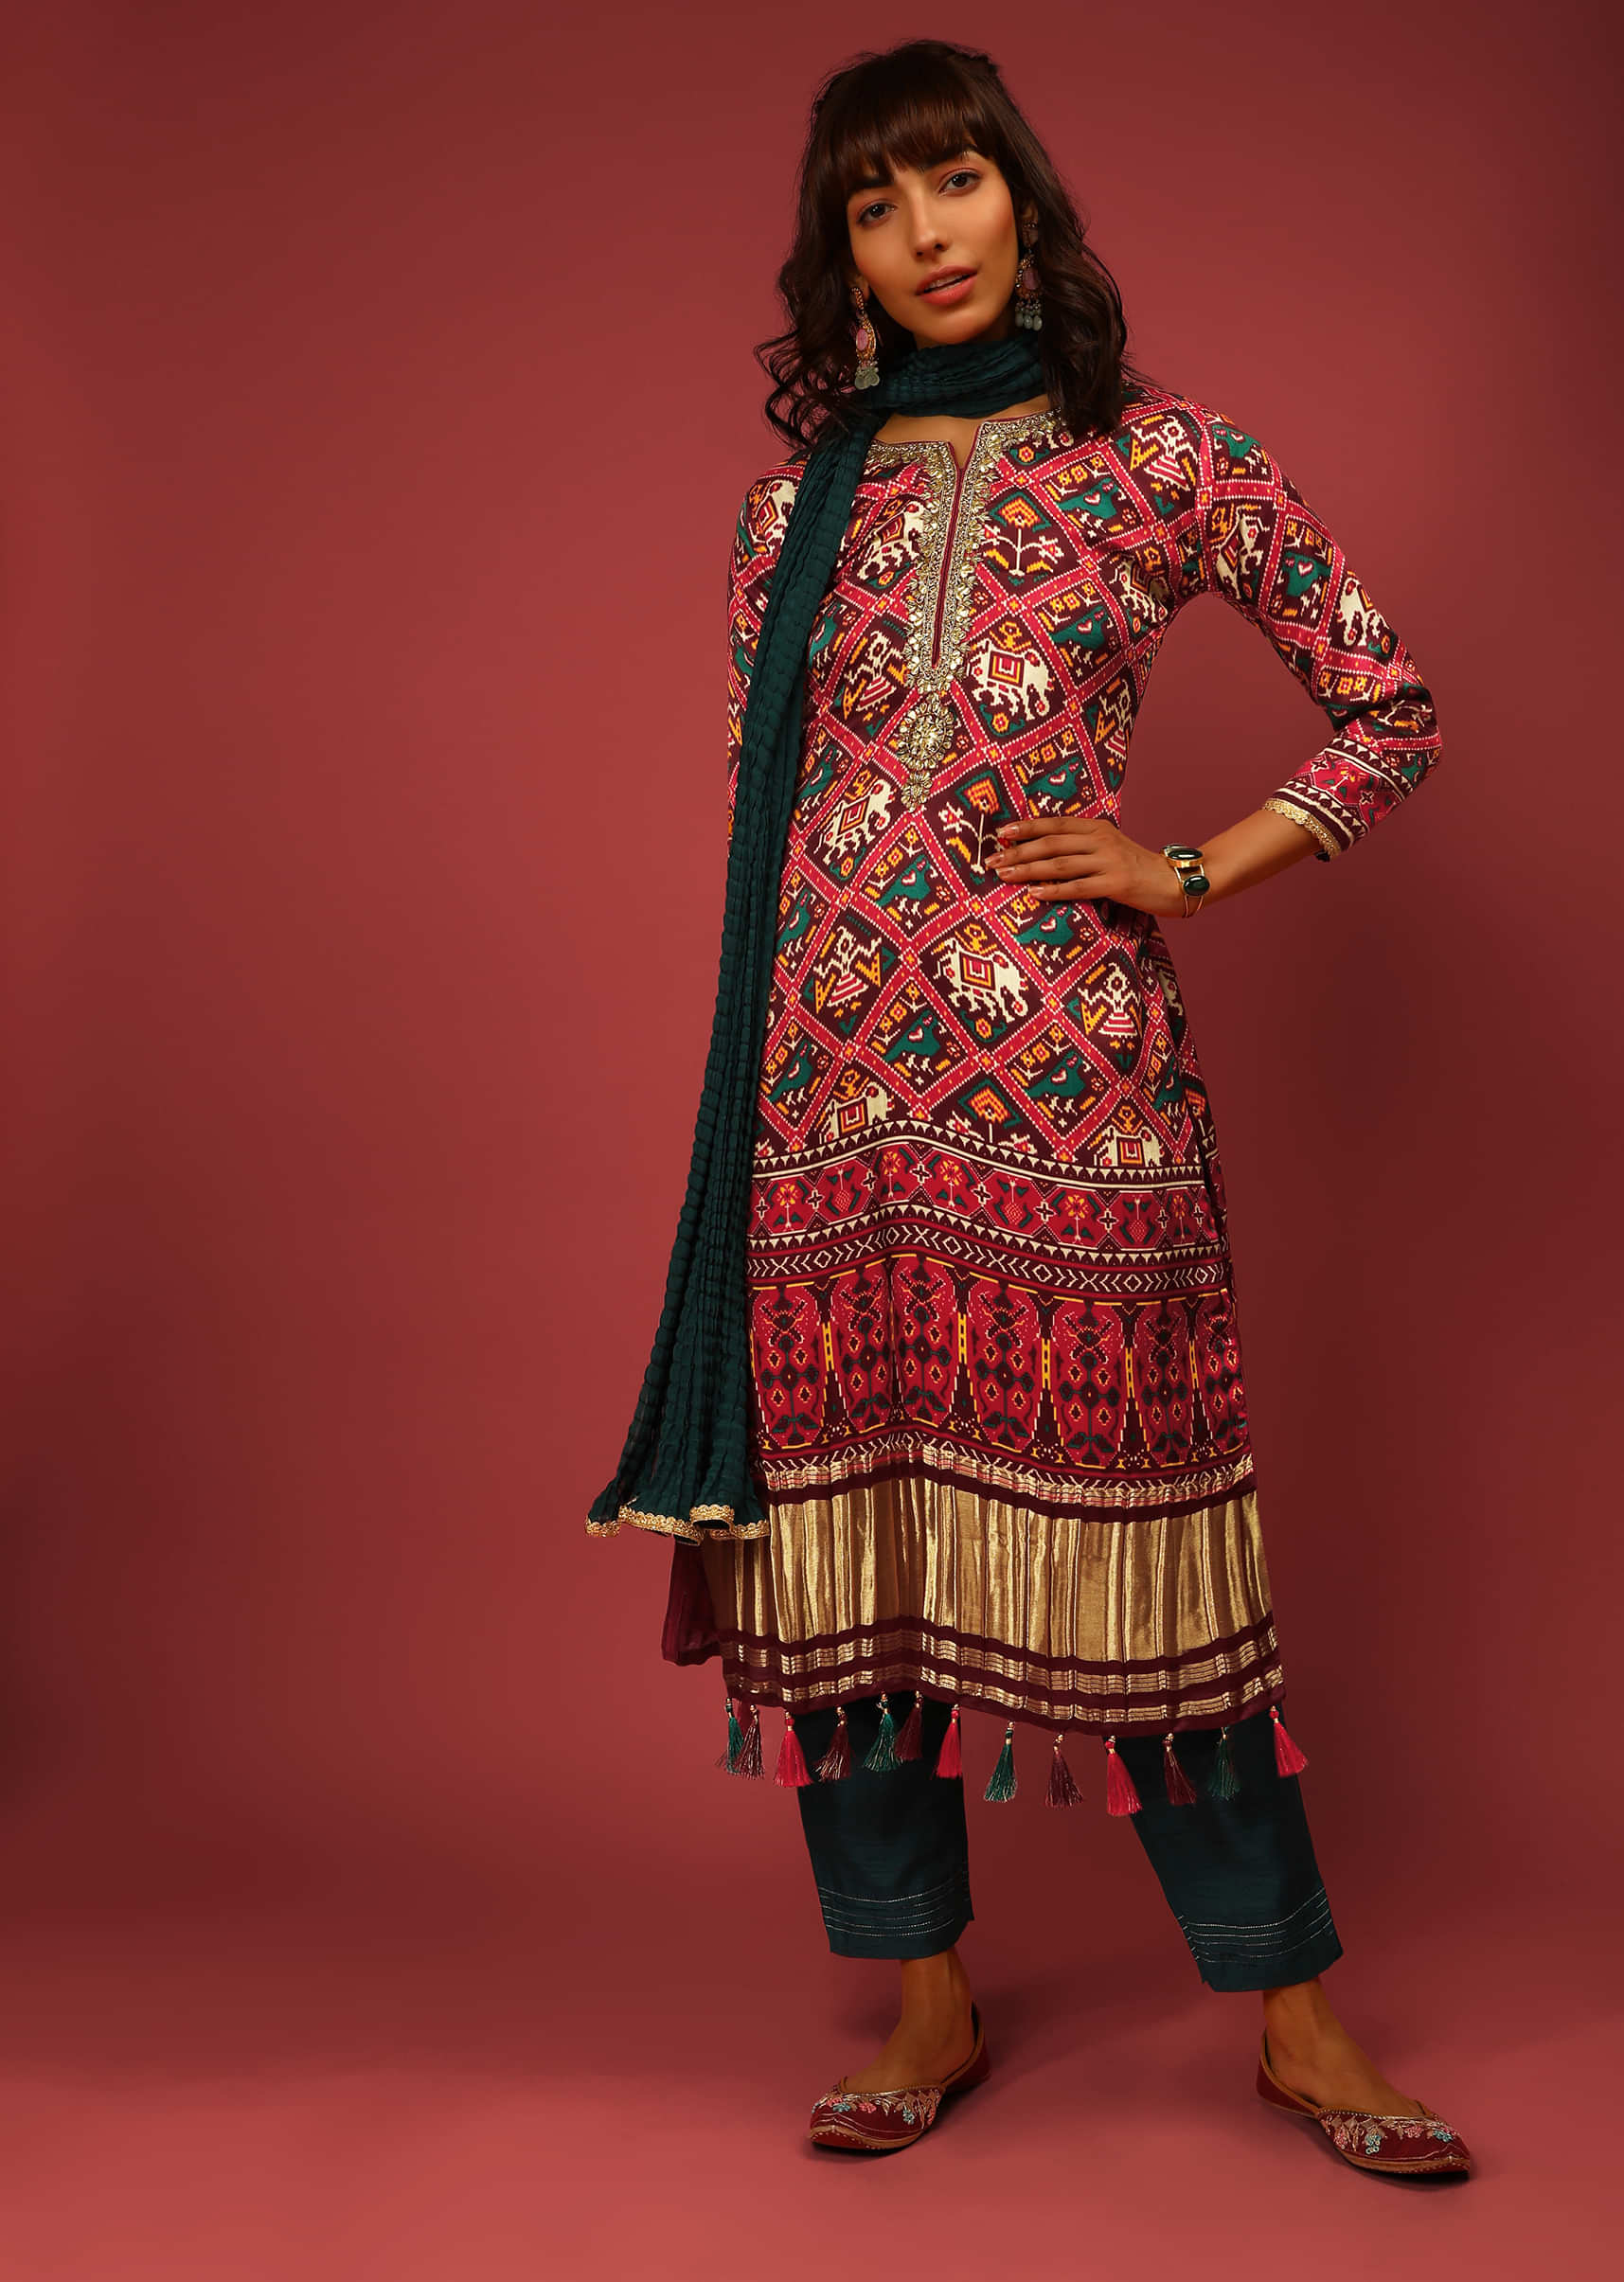 Maroon Straight Cut Suit In Satin Blend With Patola Print And Brocade Border Edged In Tassels  